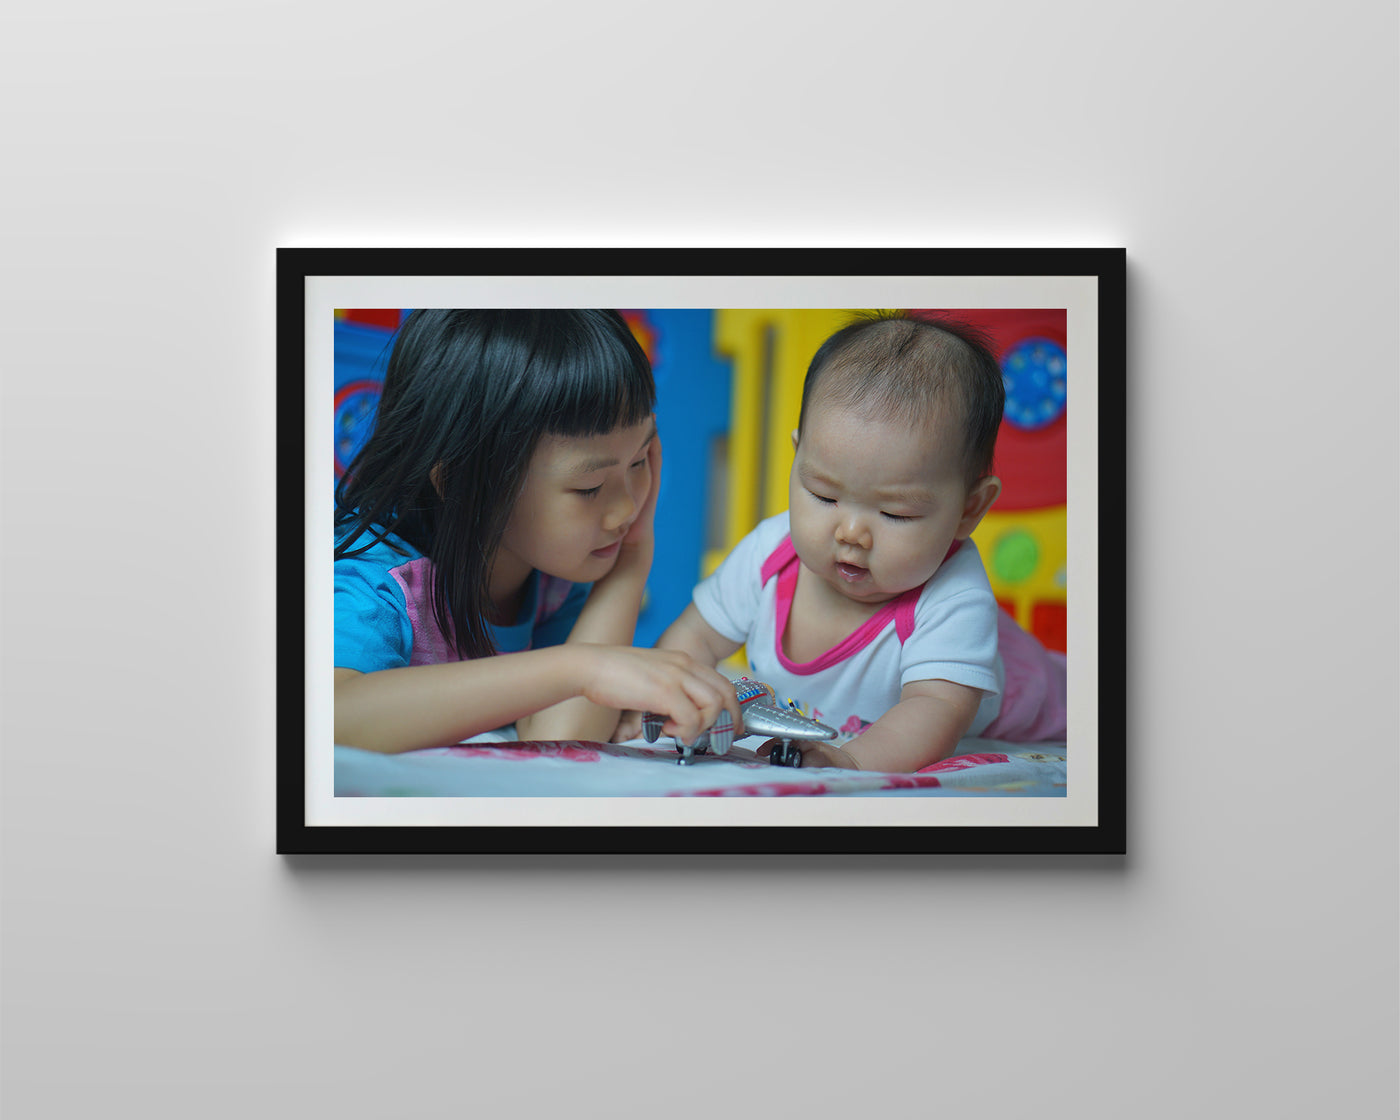 Playing Aeroplane With Sibling (Framed Prints)